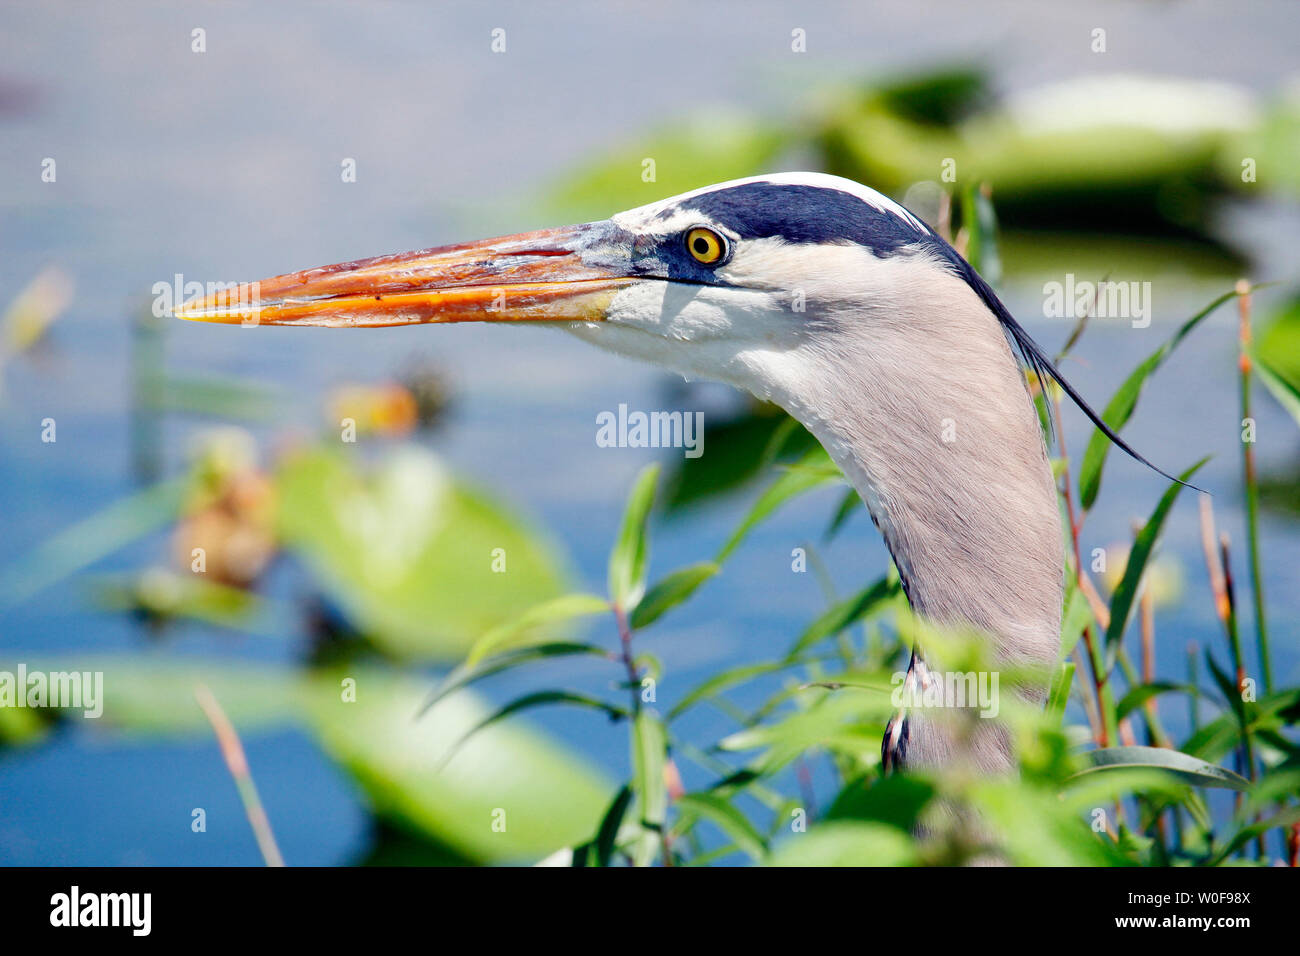 USA. Florida. Everglades National Park. Anhinga Trail. Close-up of a great heron during the hunt arising from the vegetation. Stock Photo